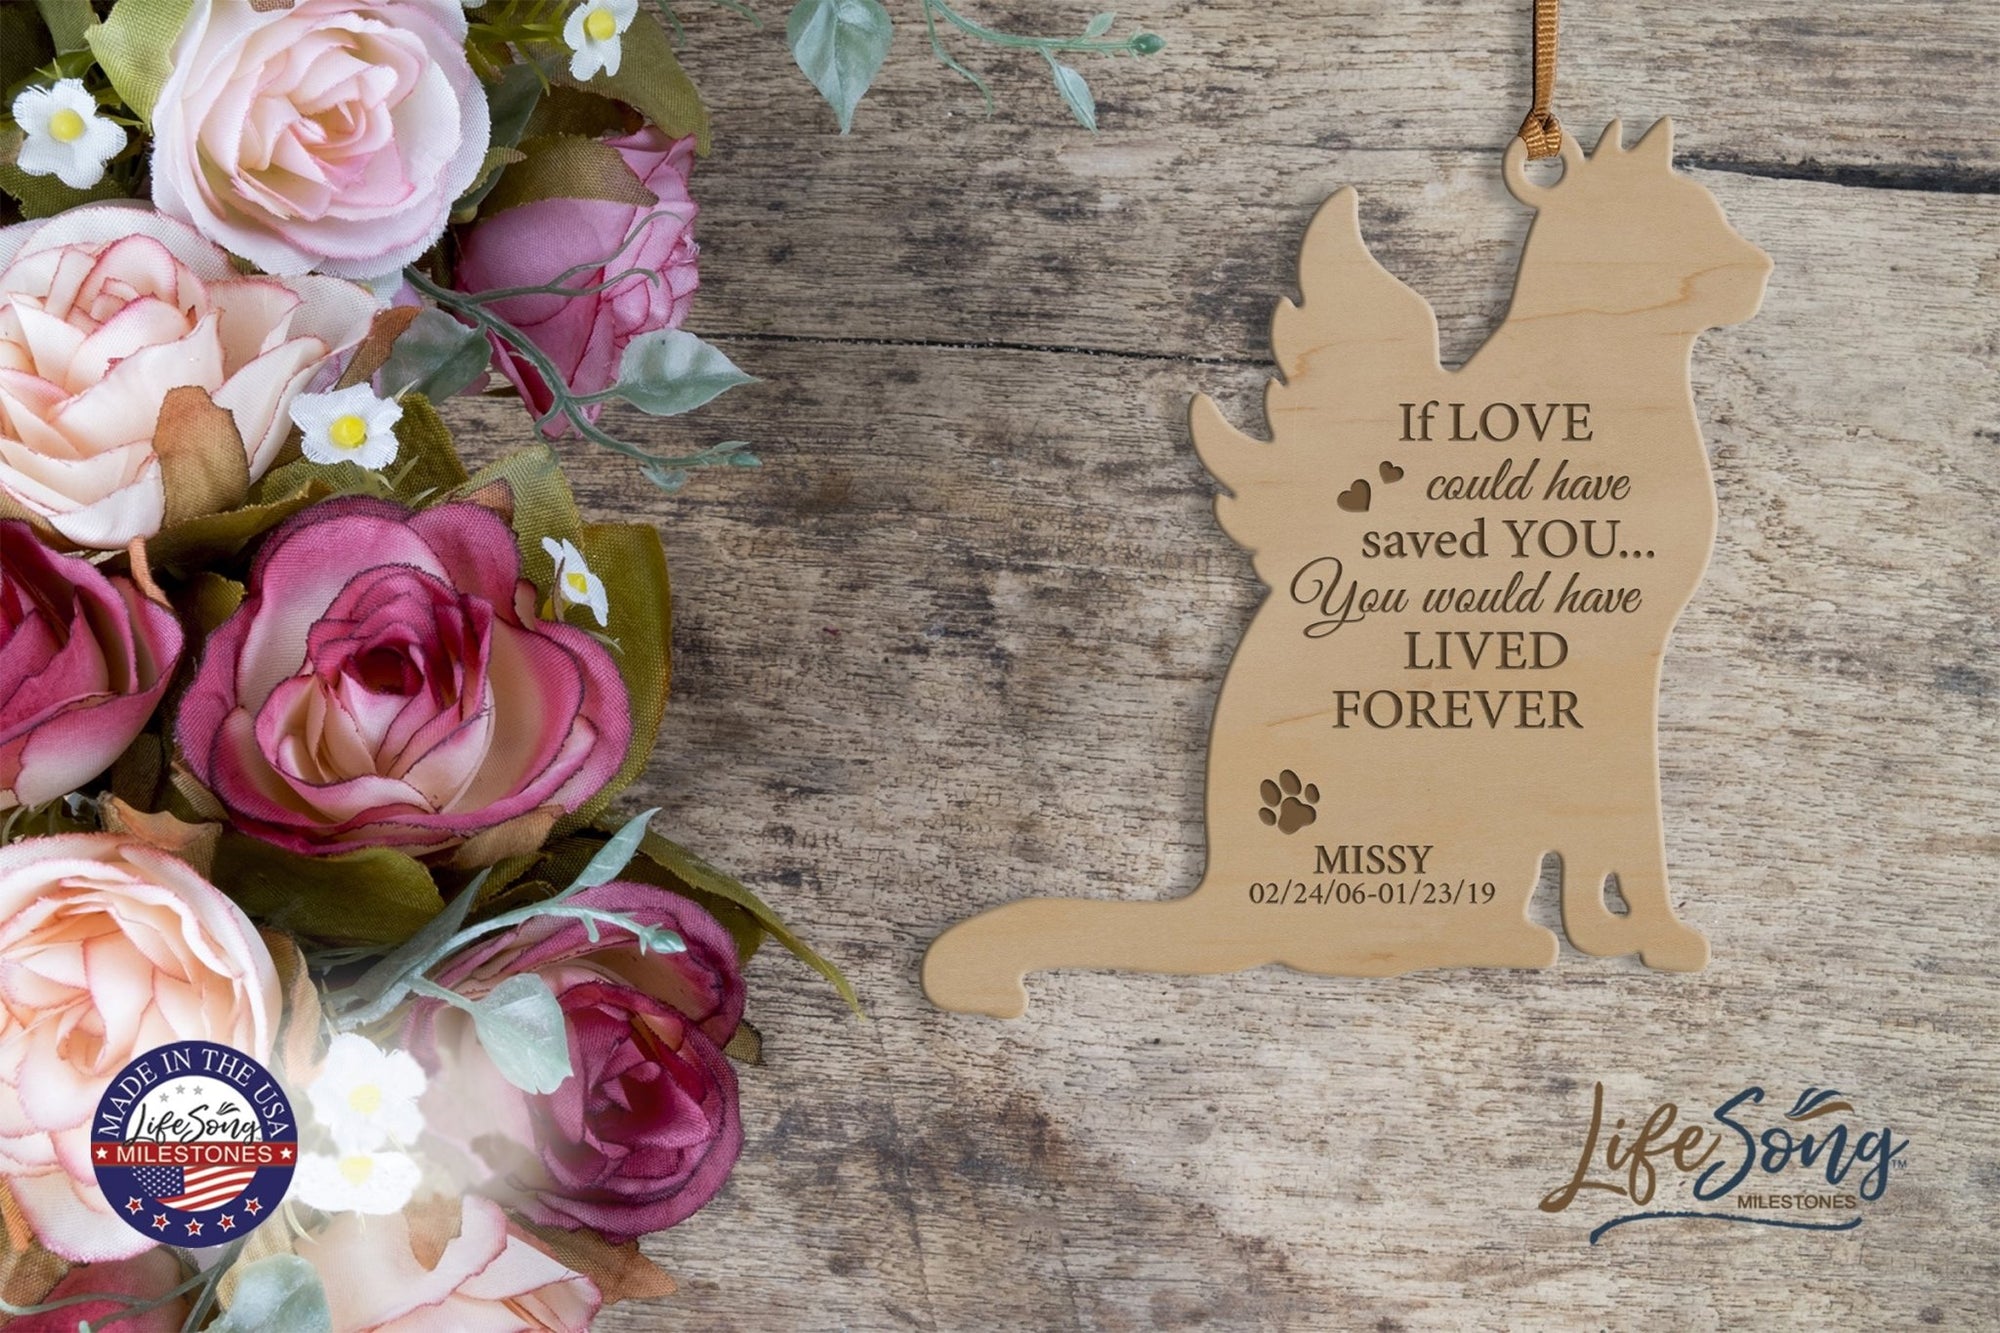 Personalized Engraved Memorial Cat Ornament 4.9375” x 5.375” x 0.125” - If love could have saved you (SCRIPT) - LifeSong Milestones